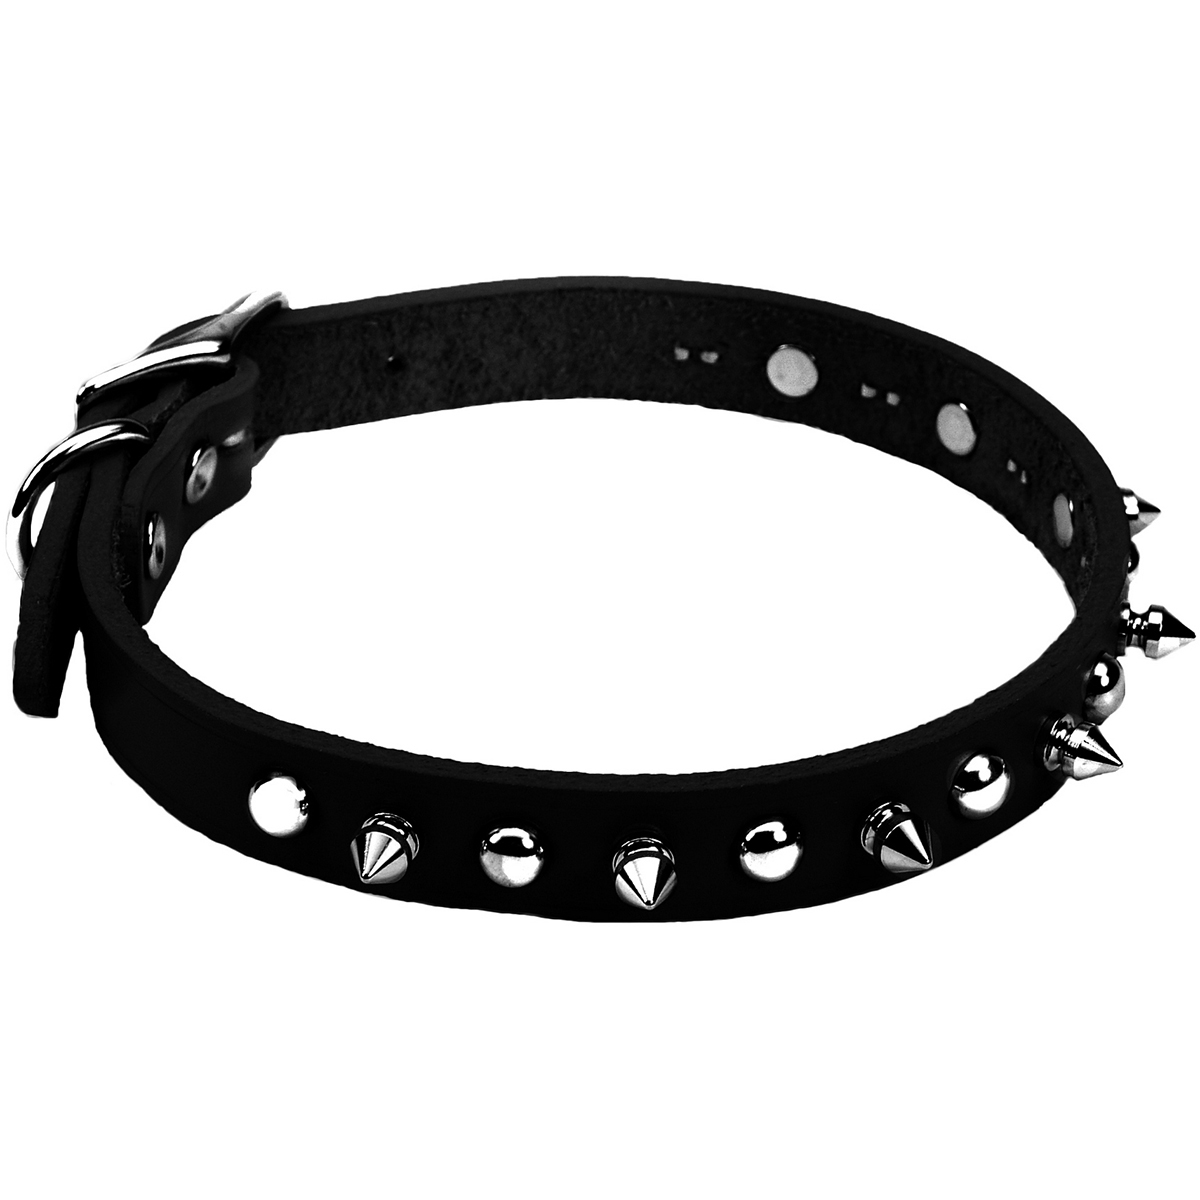 0.62 X 16 In. Circle T Oak Tanned Leather Spiked Dog Collar, Black